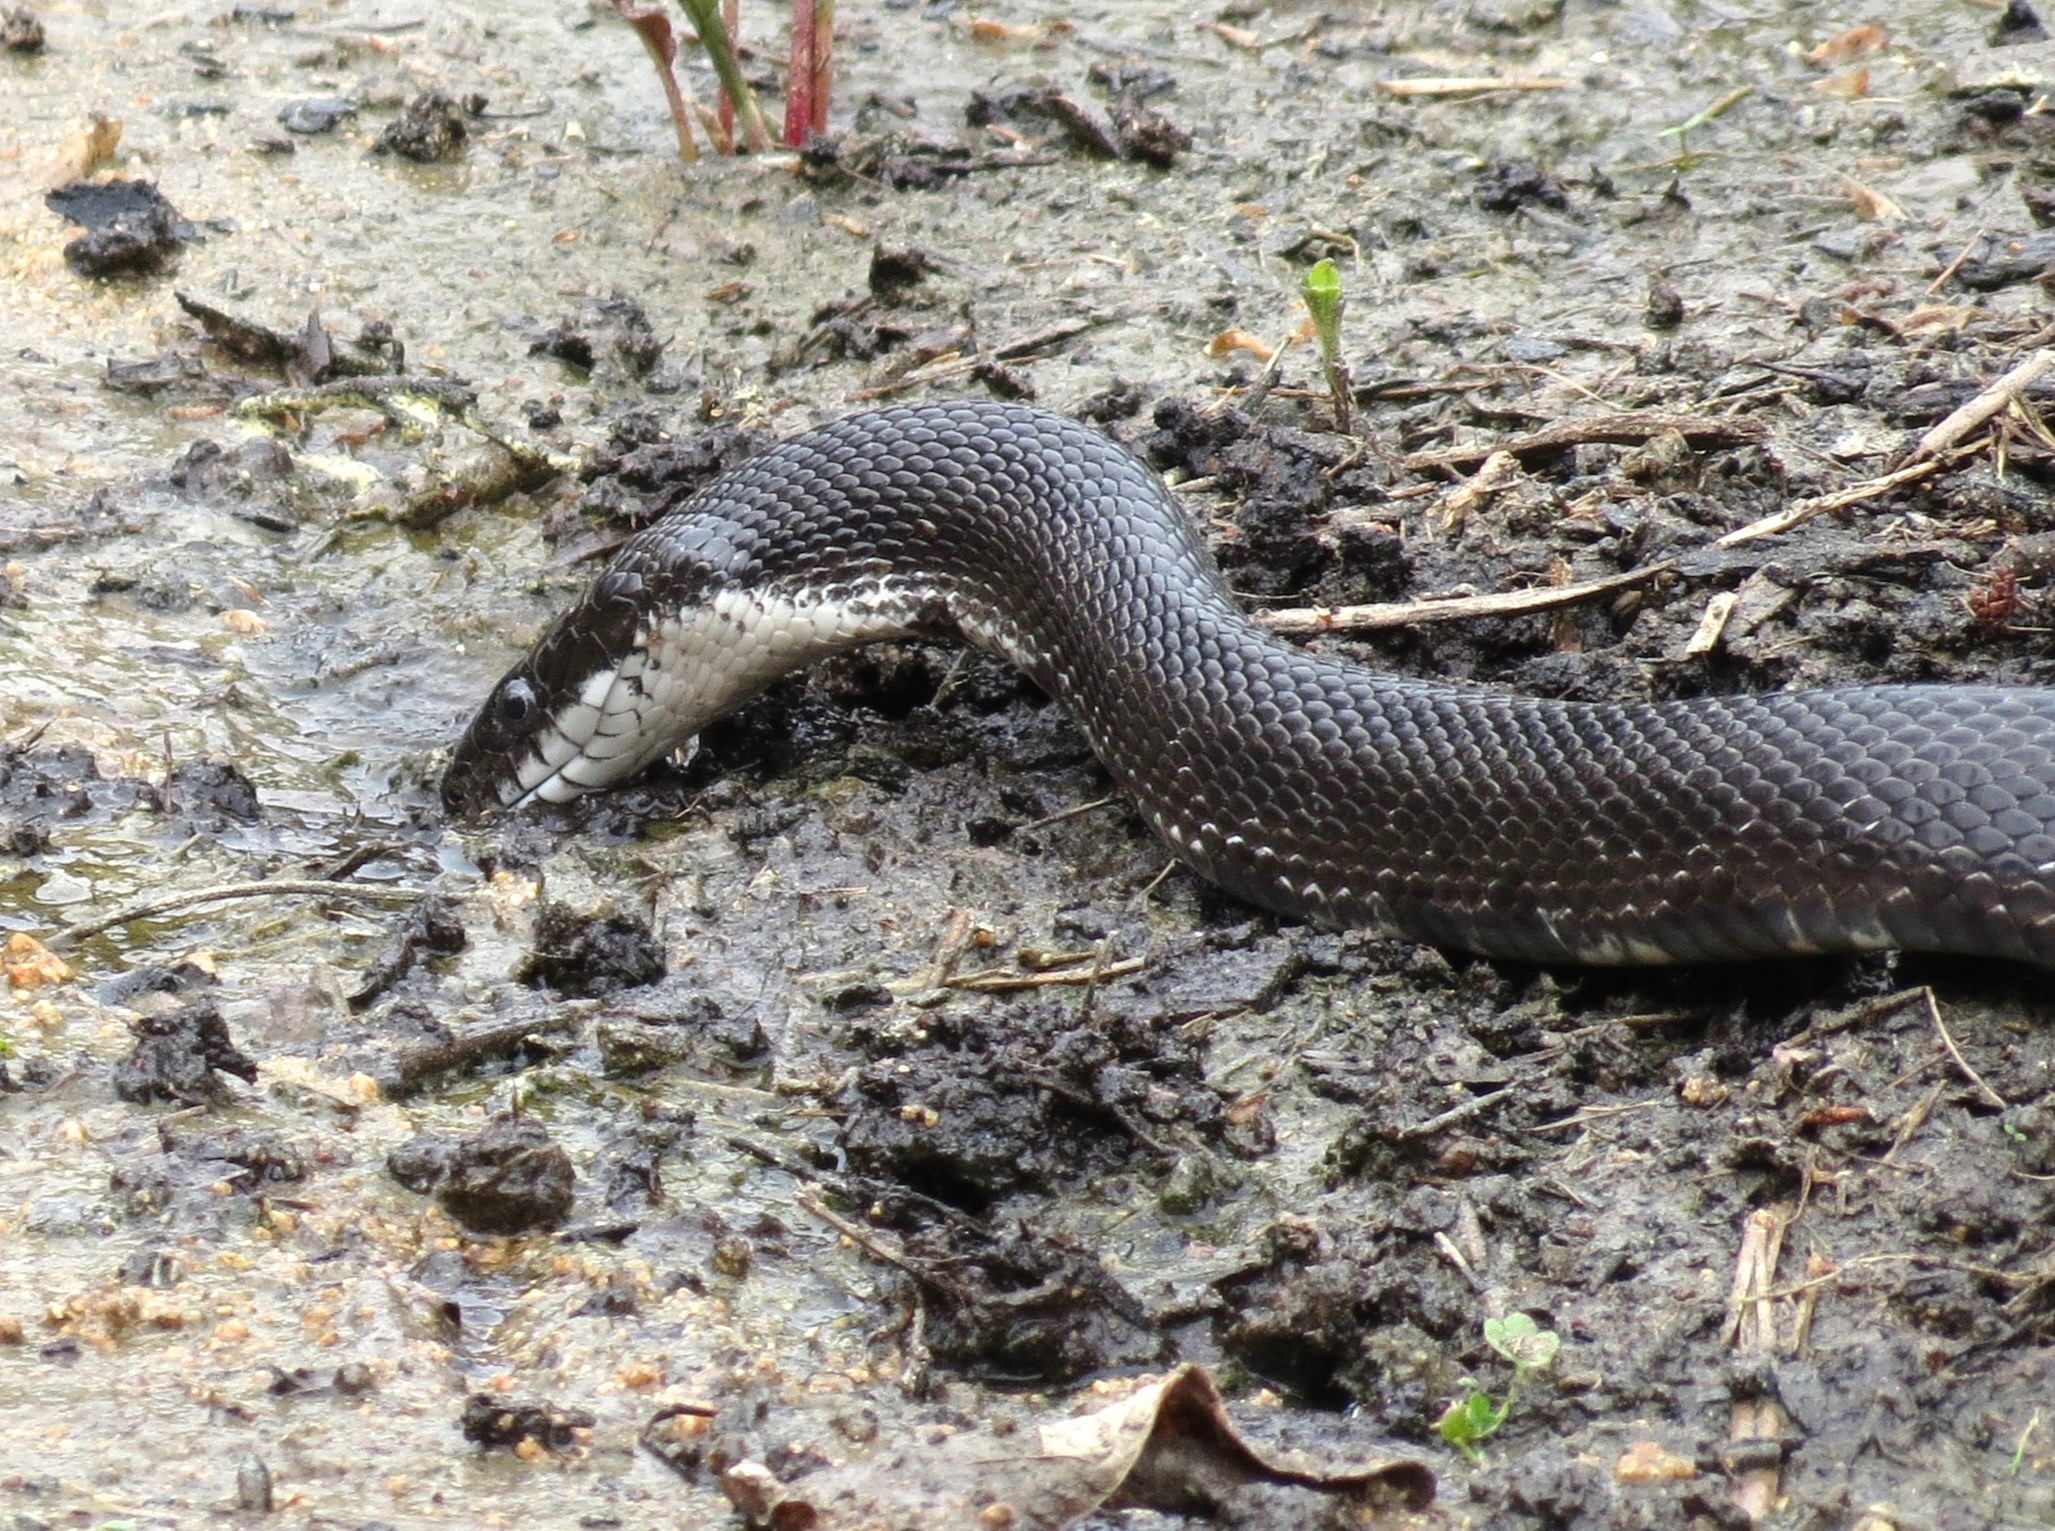 A large black snake with white chin and a few white flecks along its side. Its neck is arched so it can drink from a puddle.